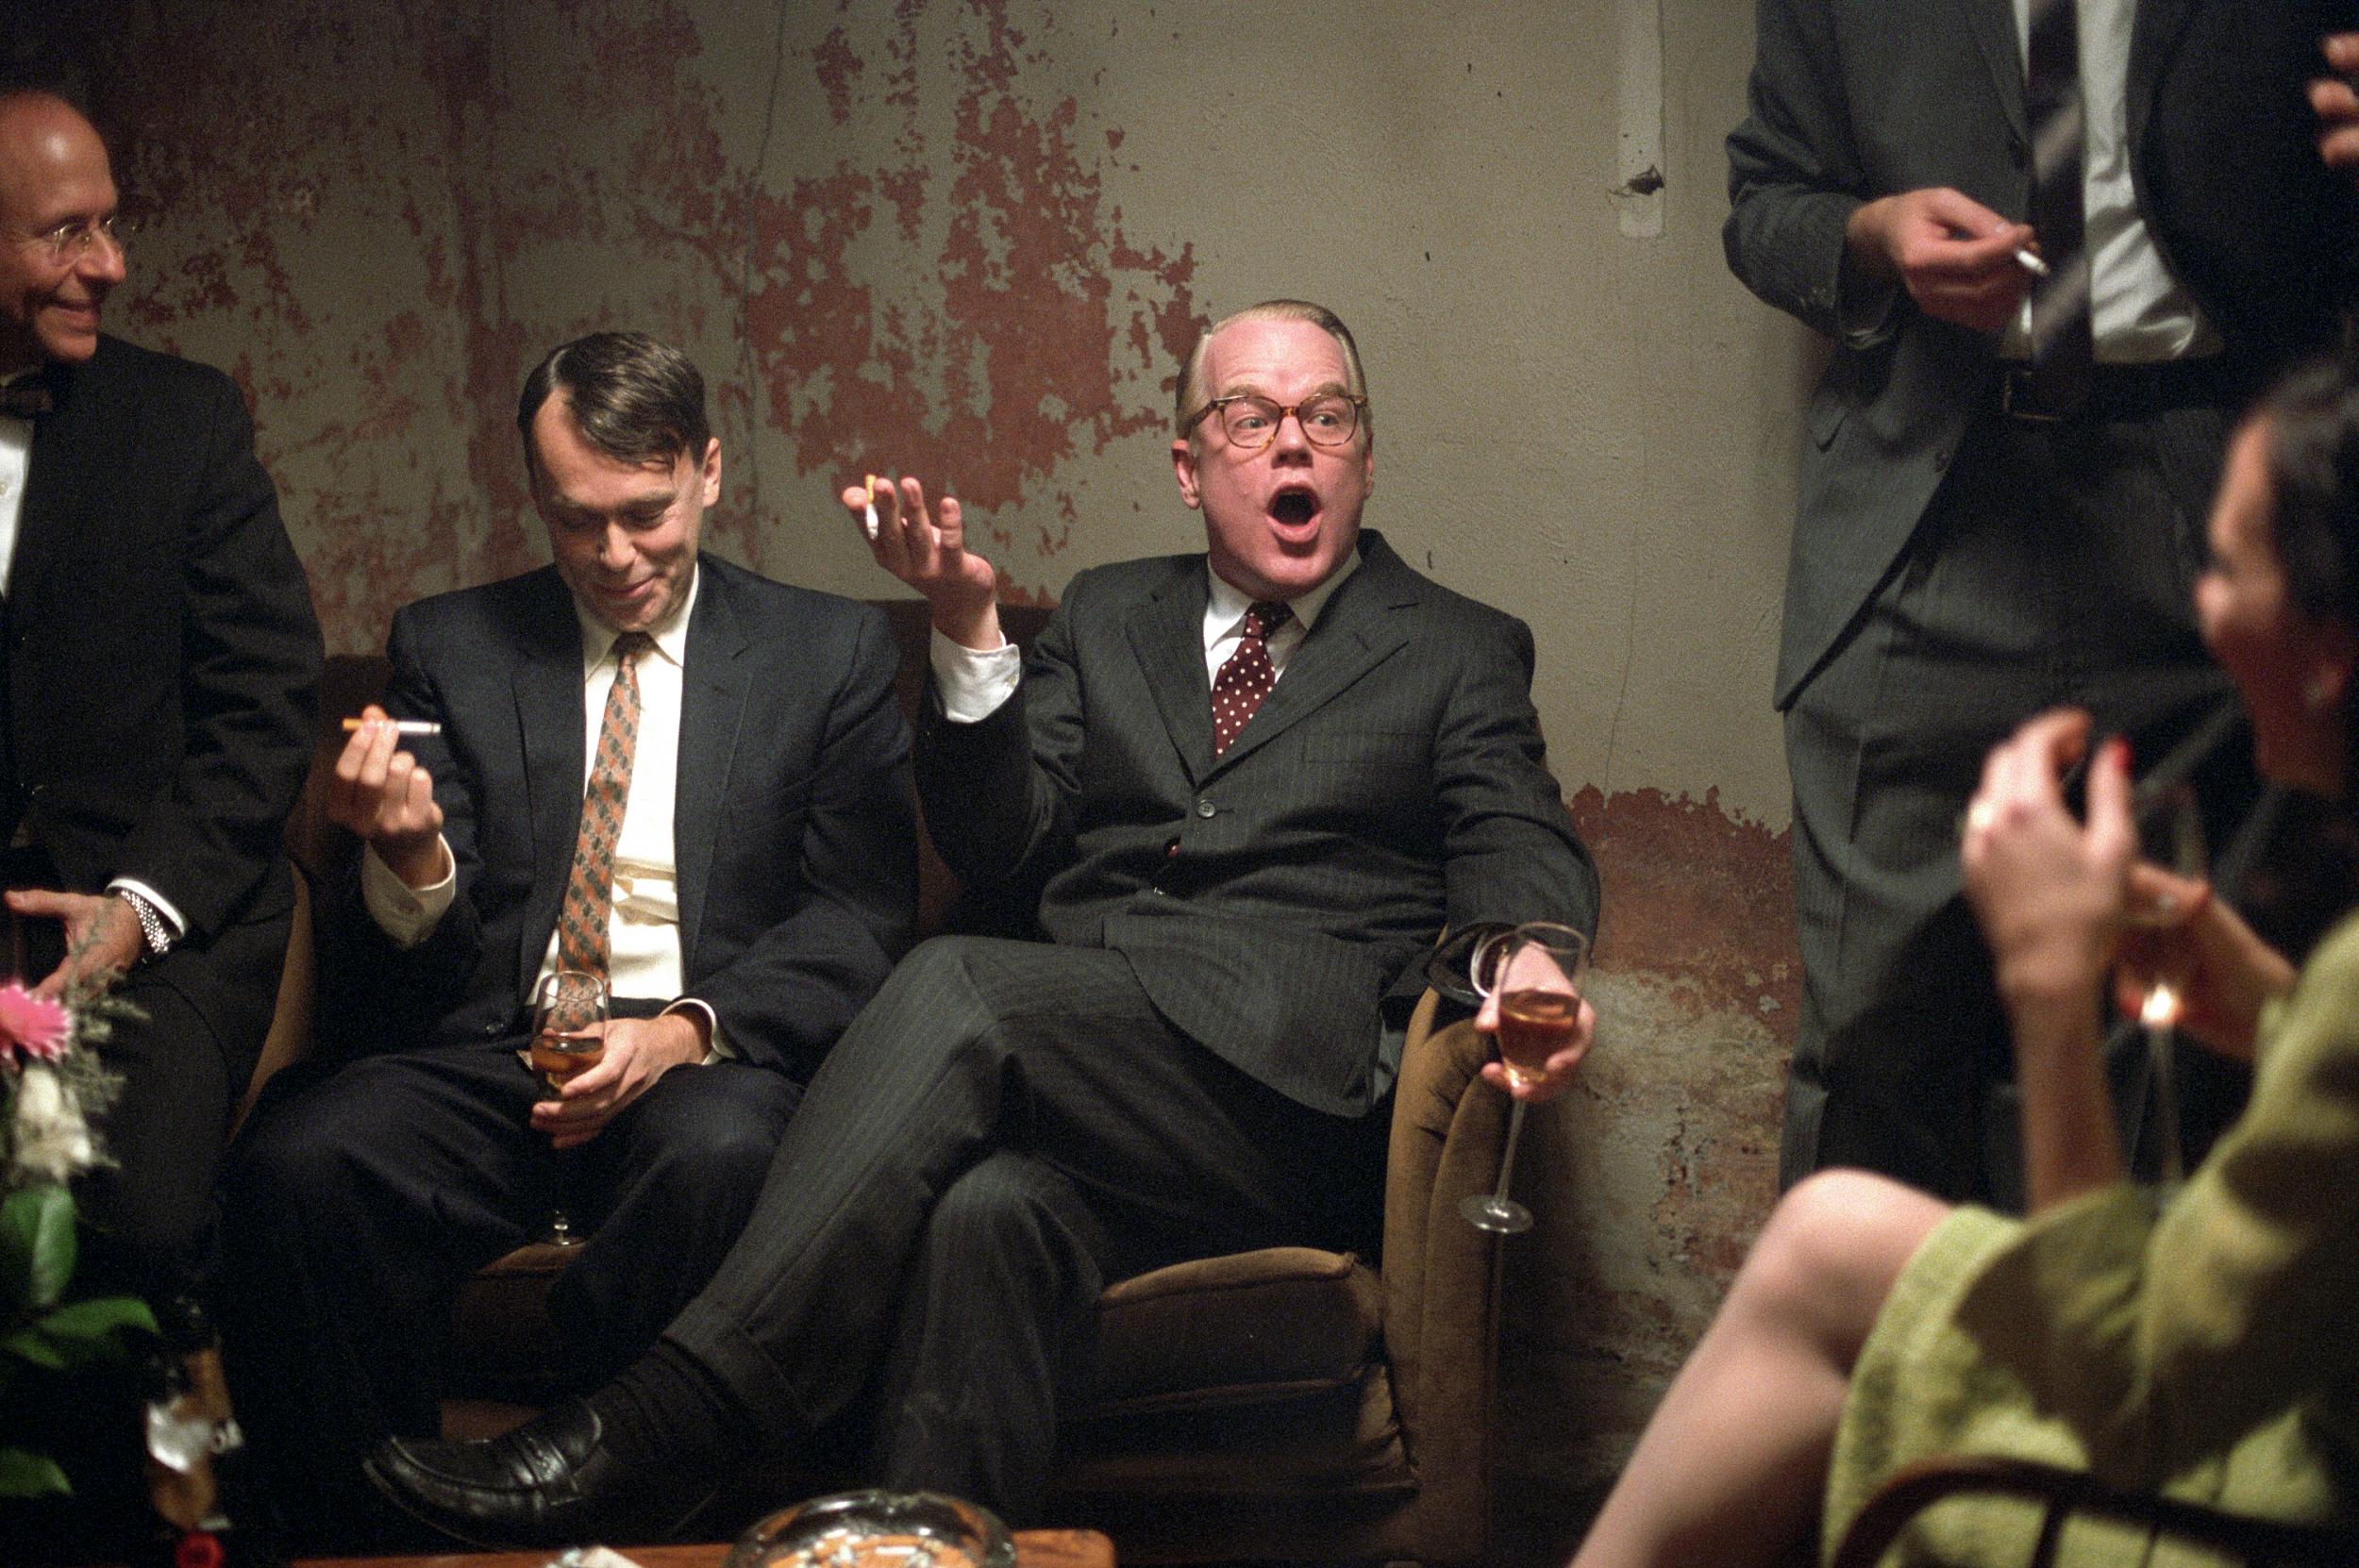 Philip Seymour Hoffman in his Oscar-winning Capote role